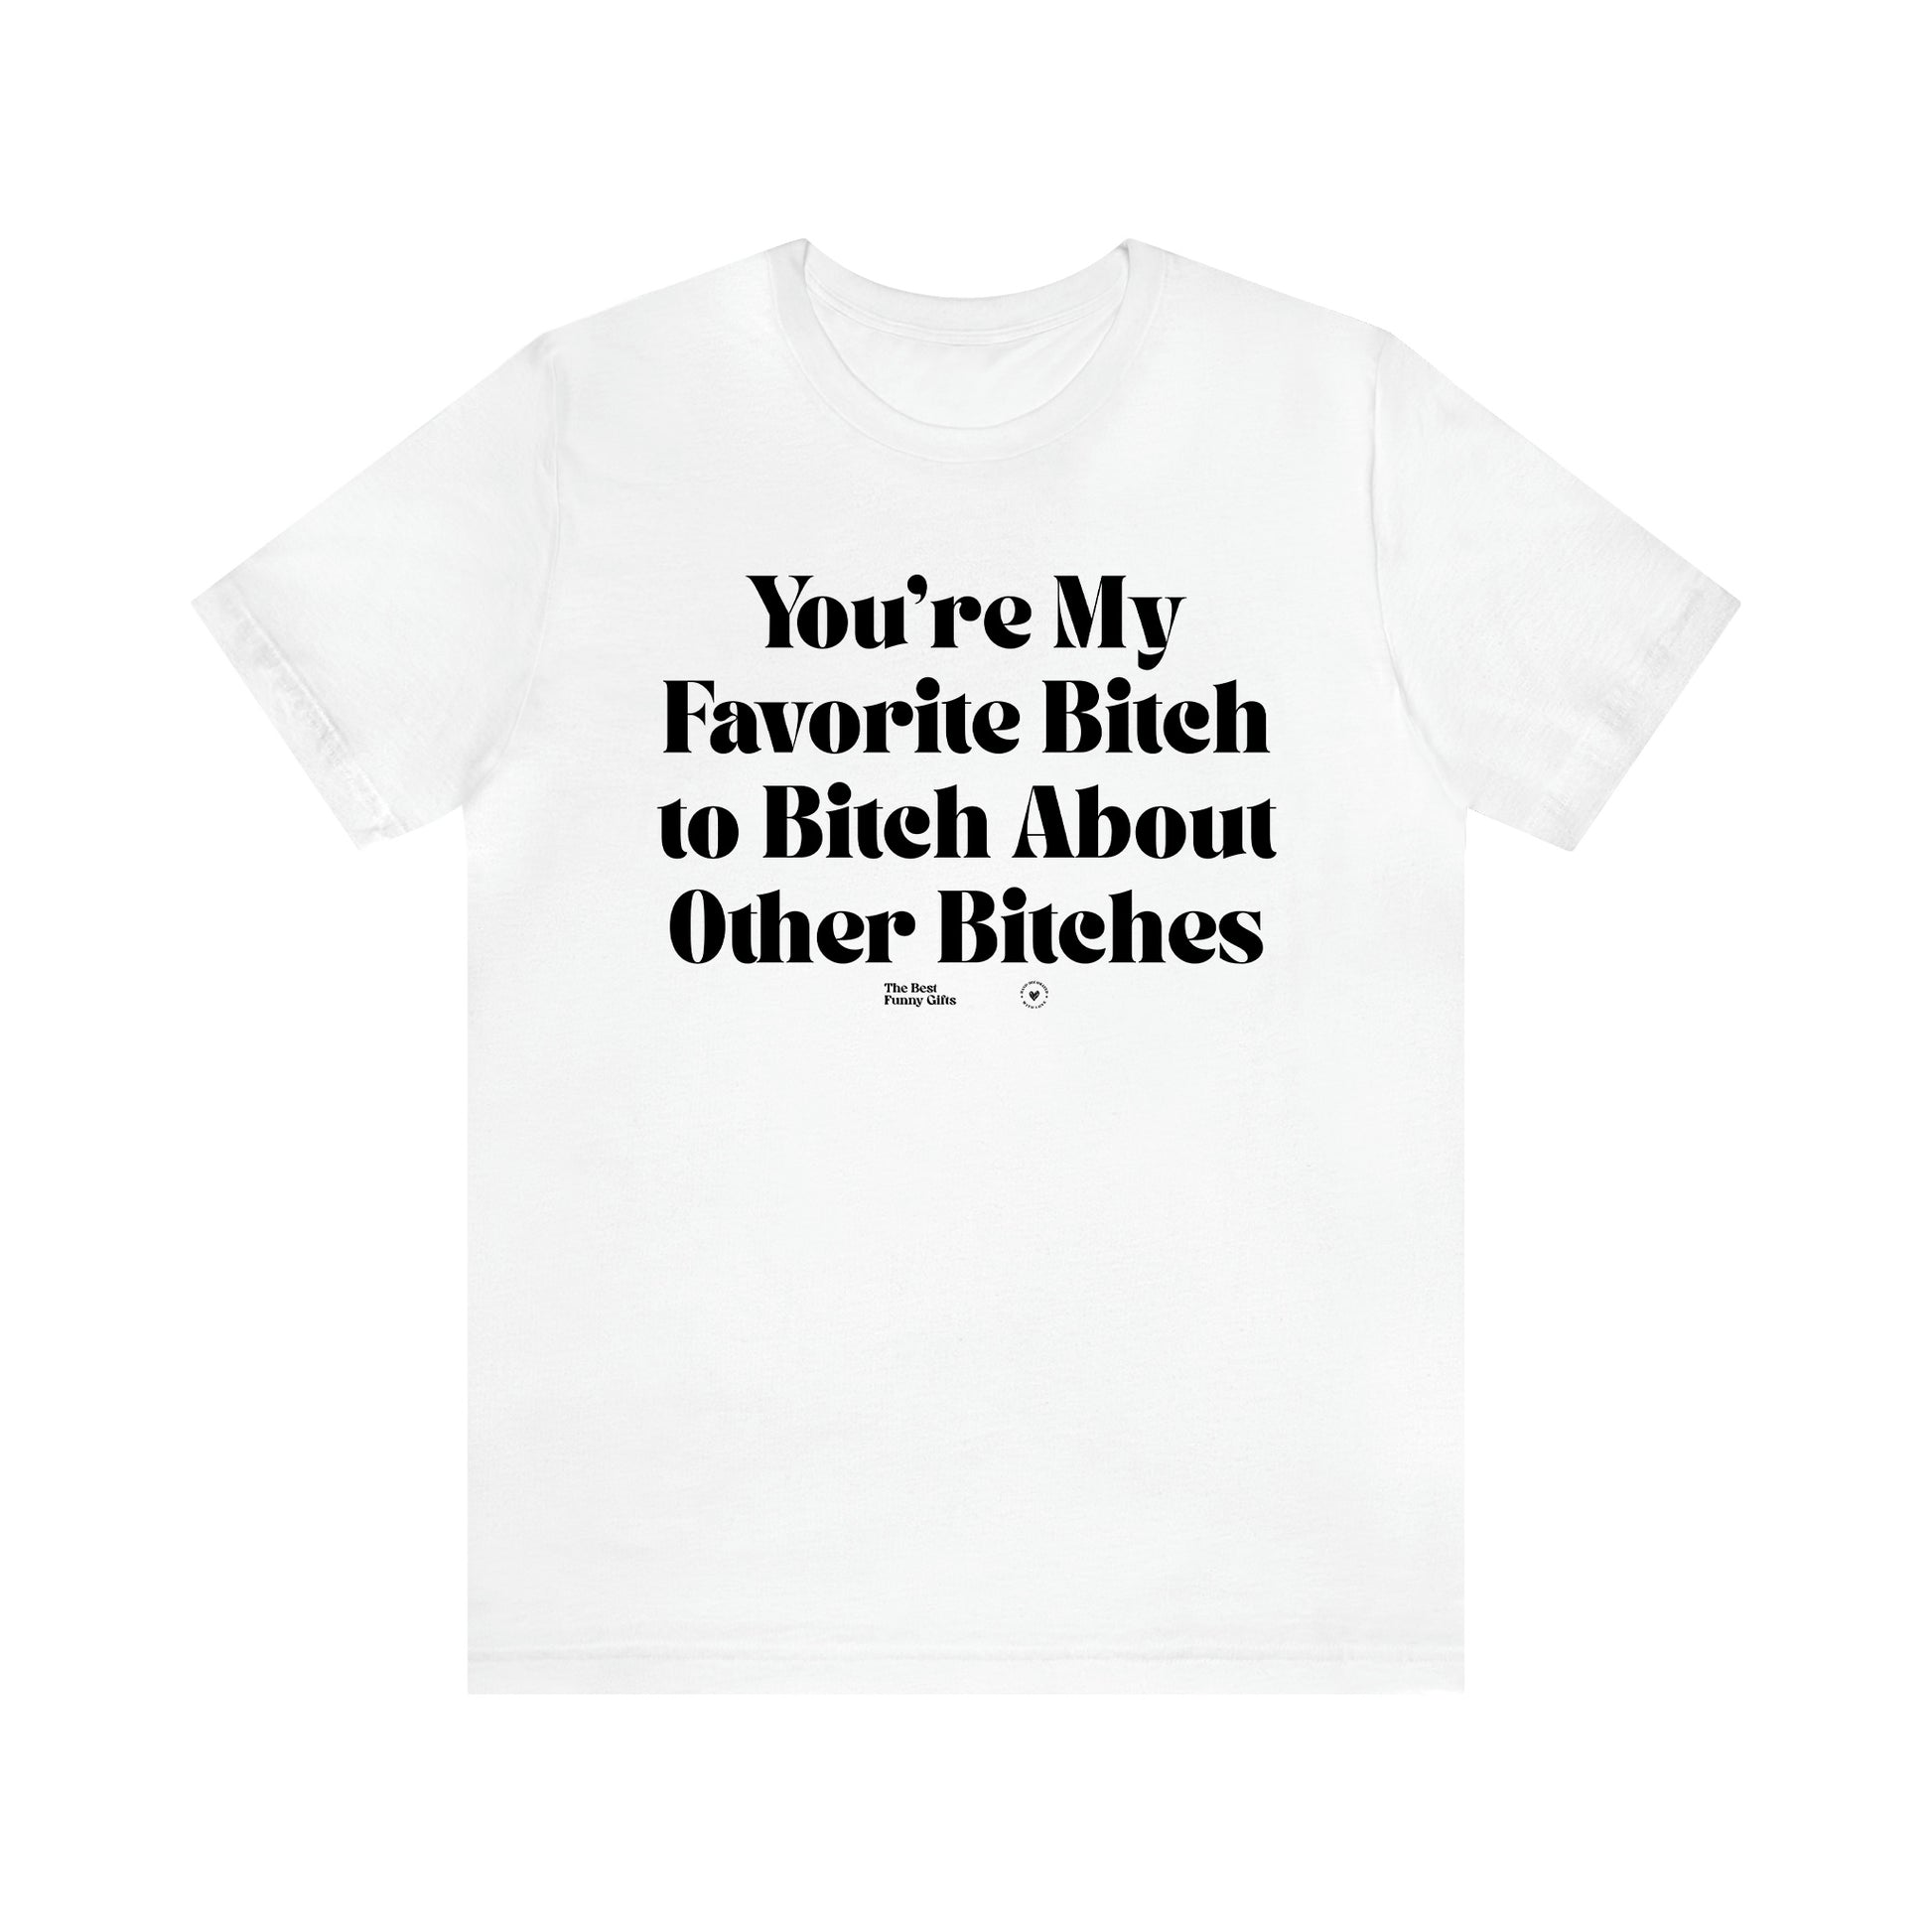 Women's T Shirts You're My Favorite Bitch to Bitch About Other Bitches - The Best Funny Gifts